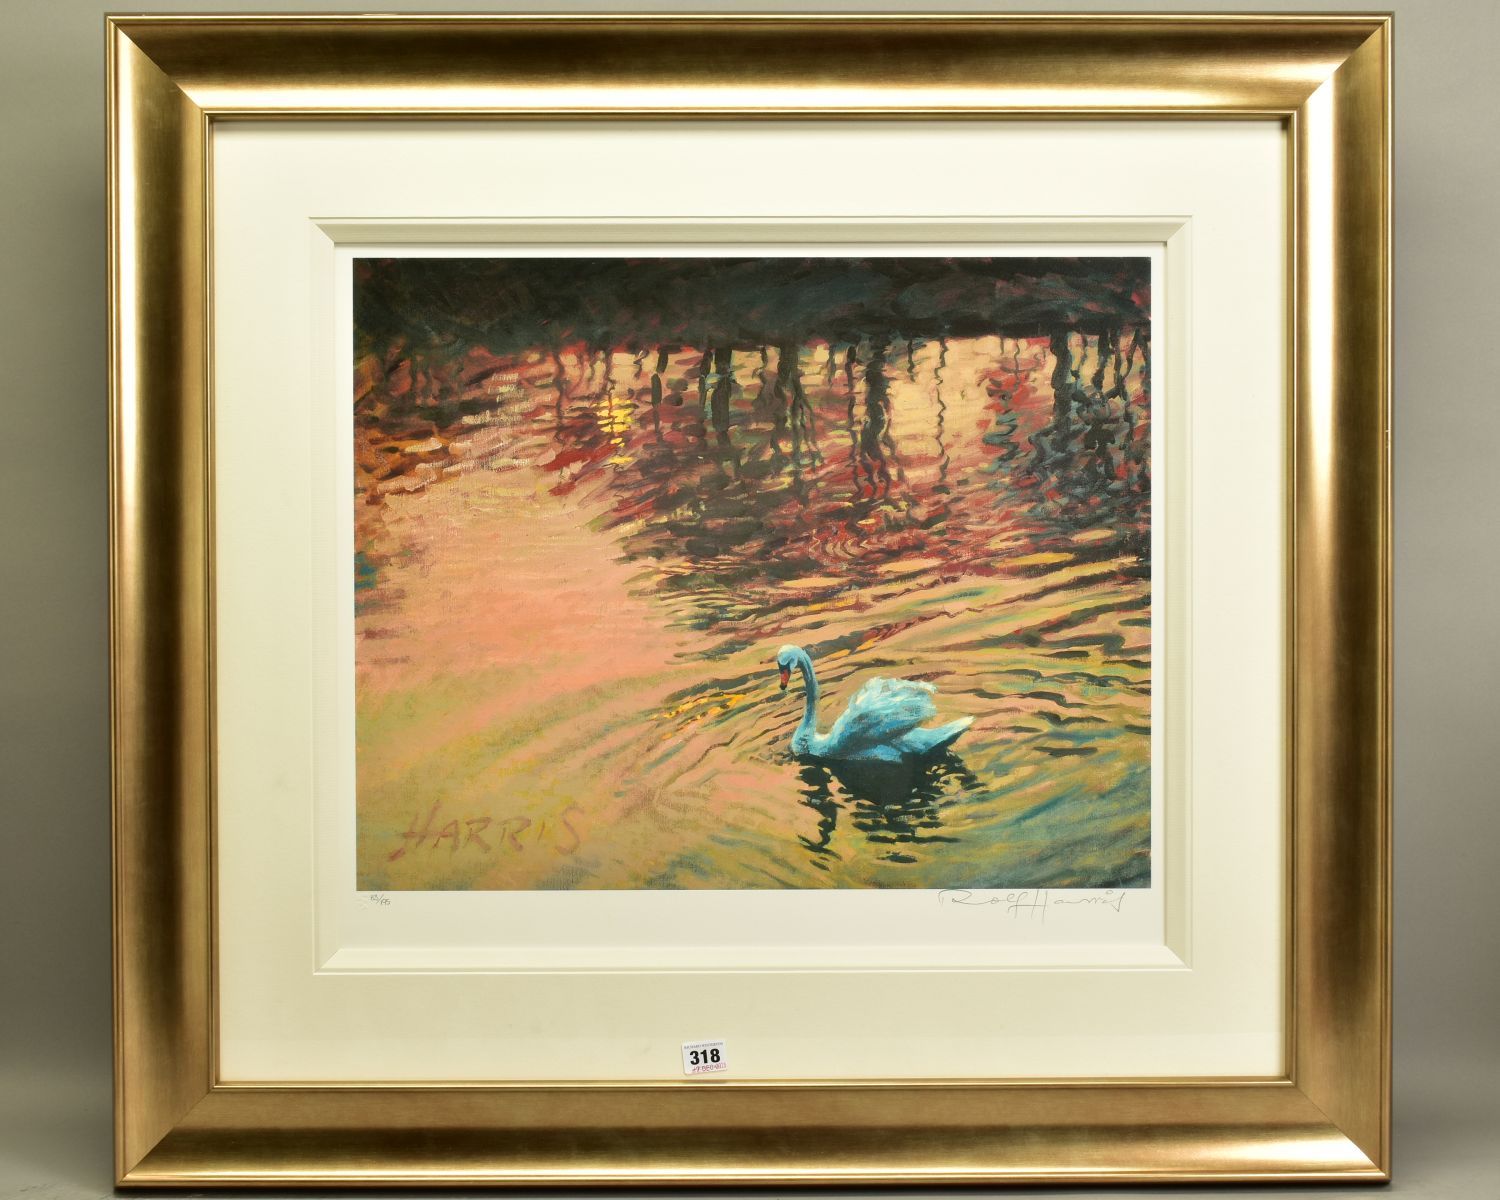 ROLF HARRIS (AUSTRALIAN 1930), 'Swan in the Morning', a limited edition print, signed to lower